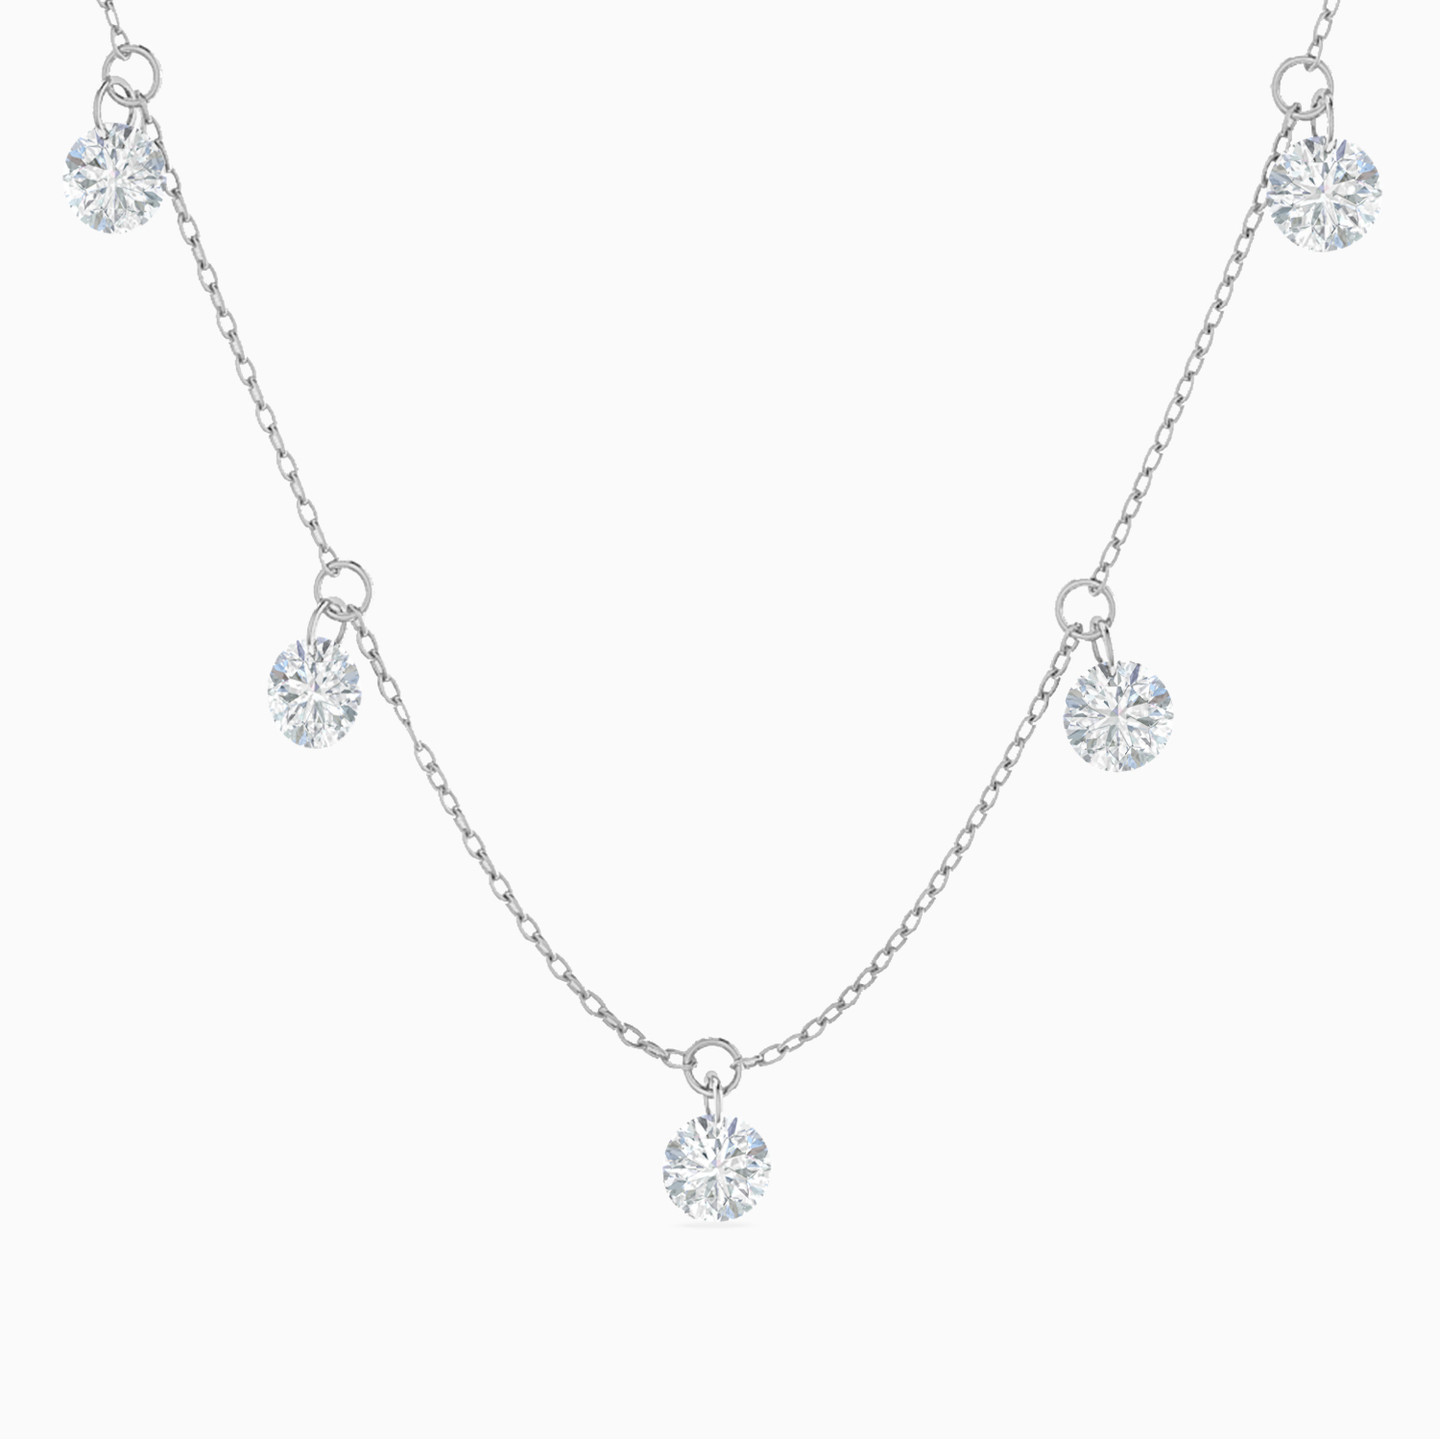 18K Gold Cubic Zirconia Chain Necklace